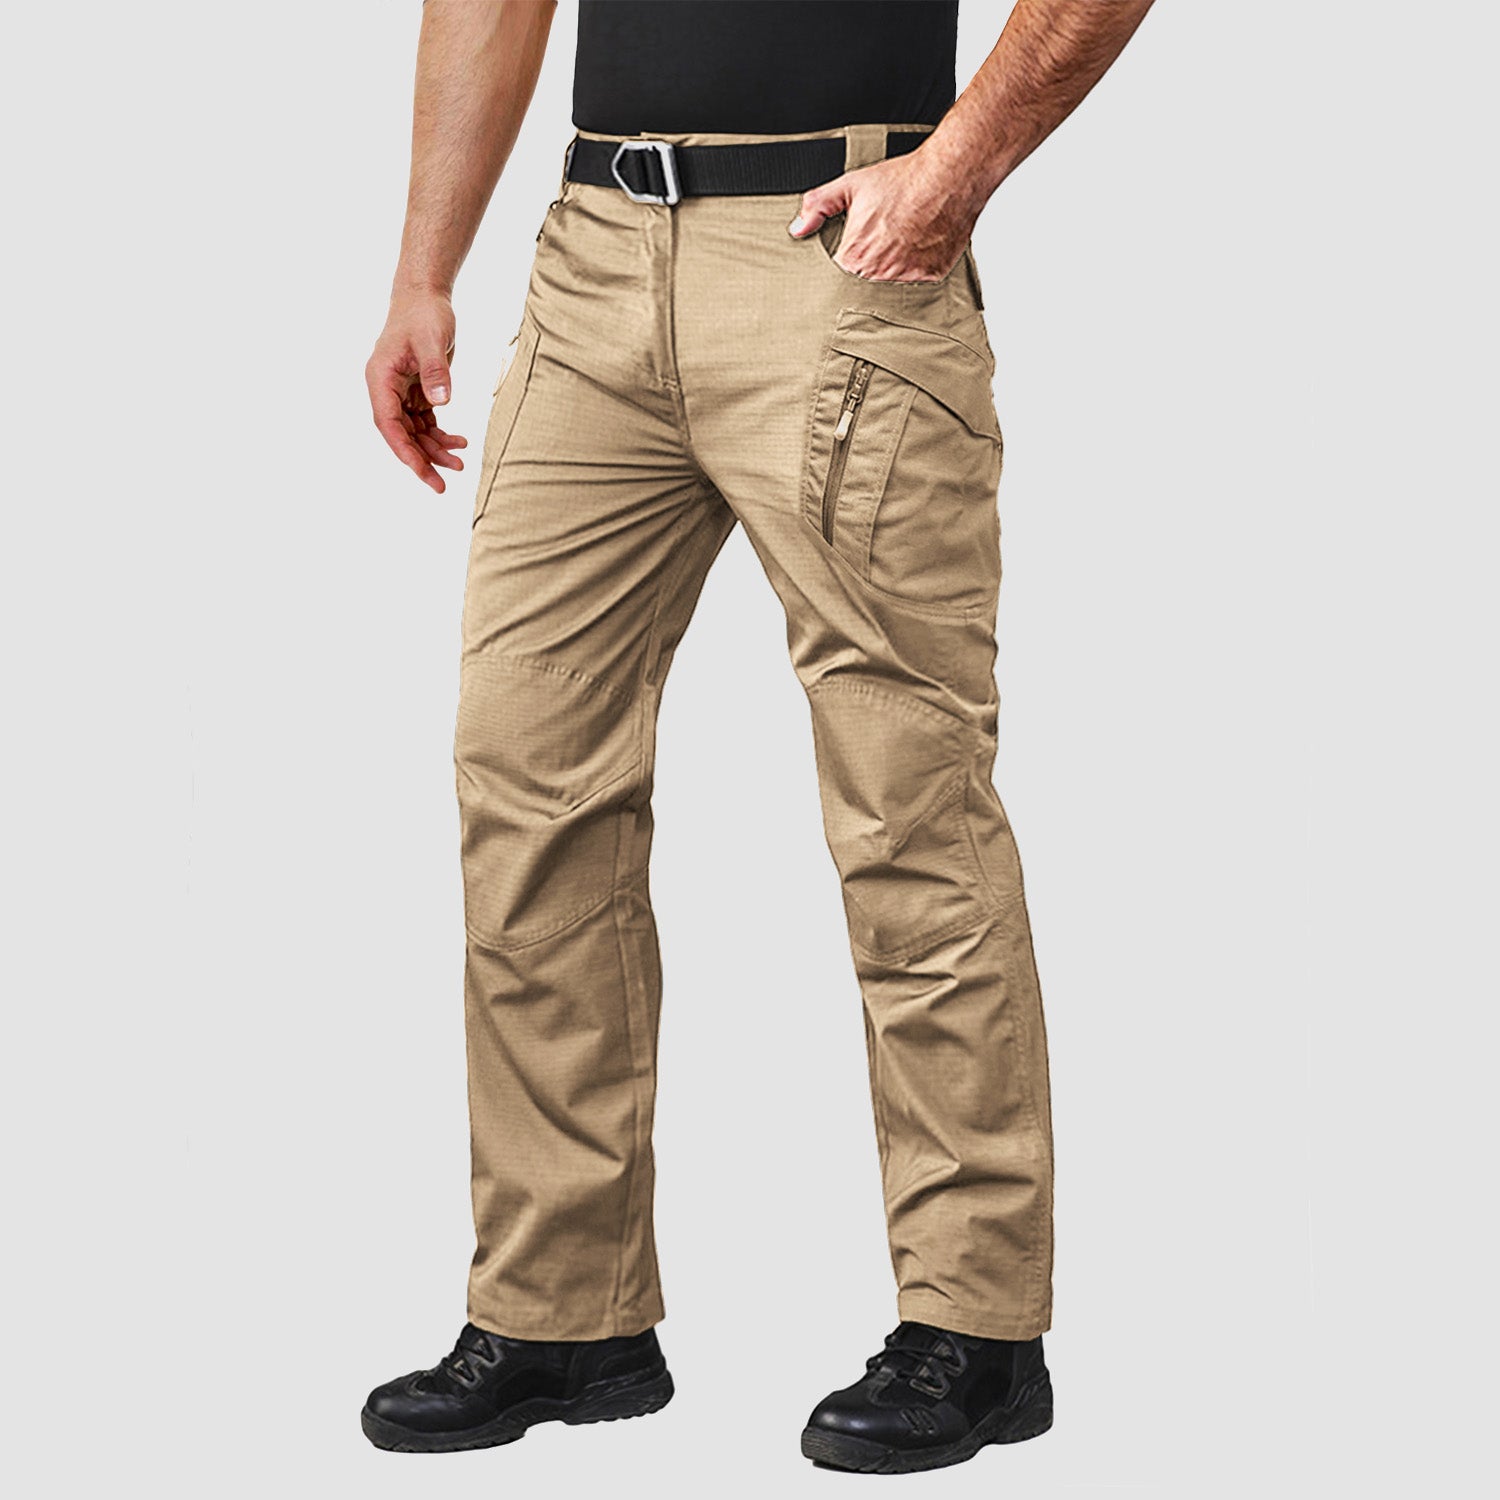 Men's Tactical Pants with 9 Pockets Rip-Stop Work Hiking Pants